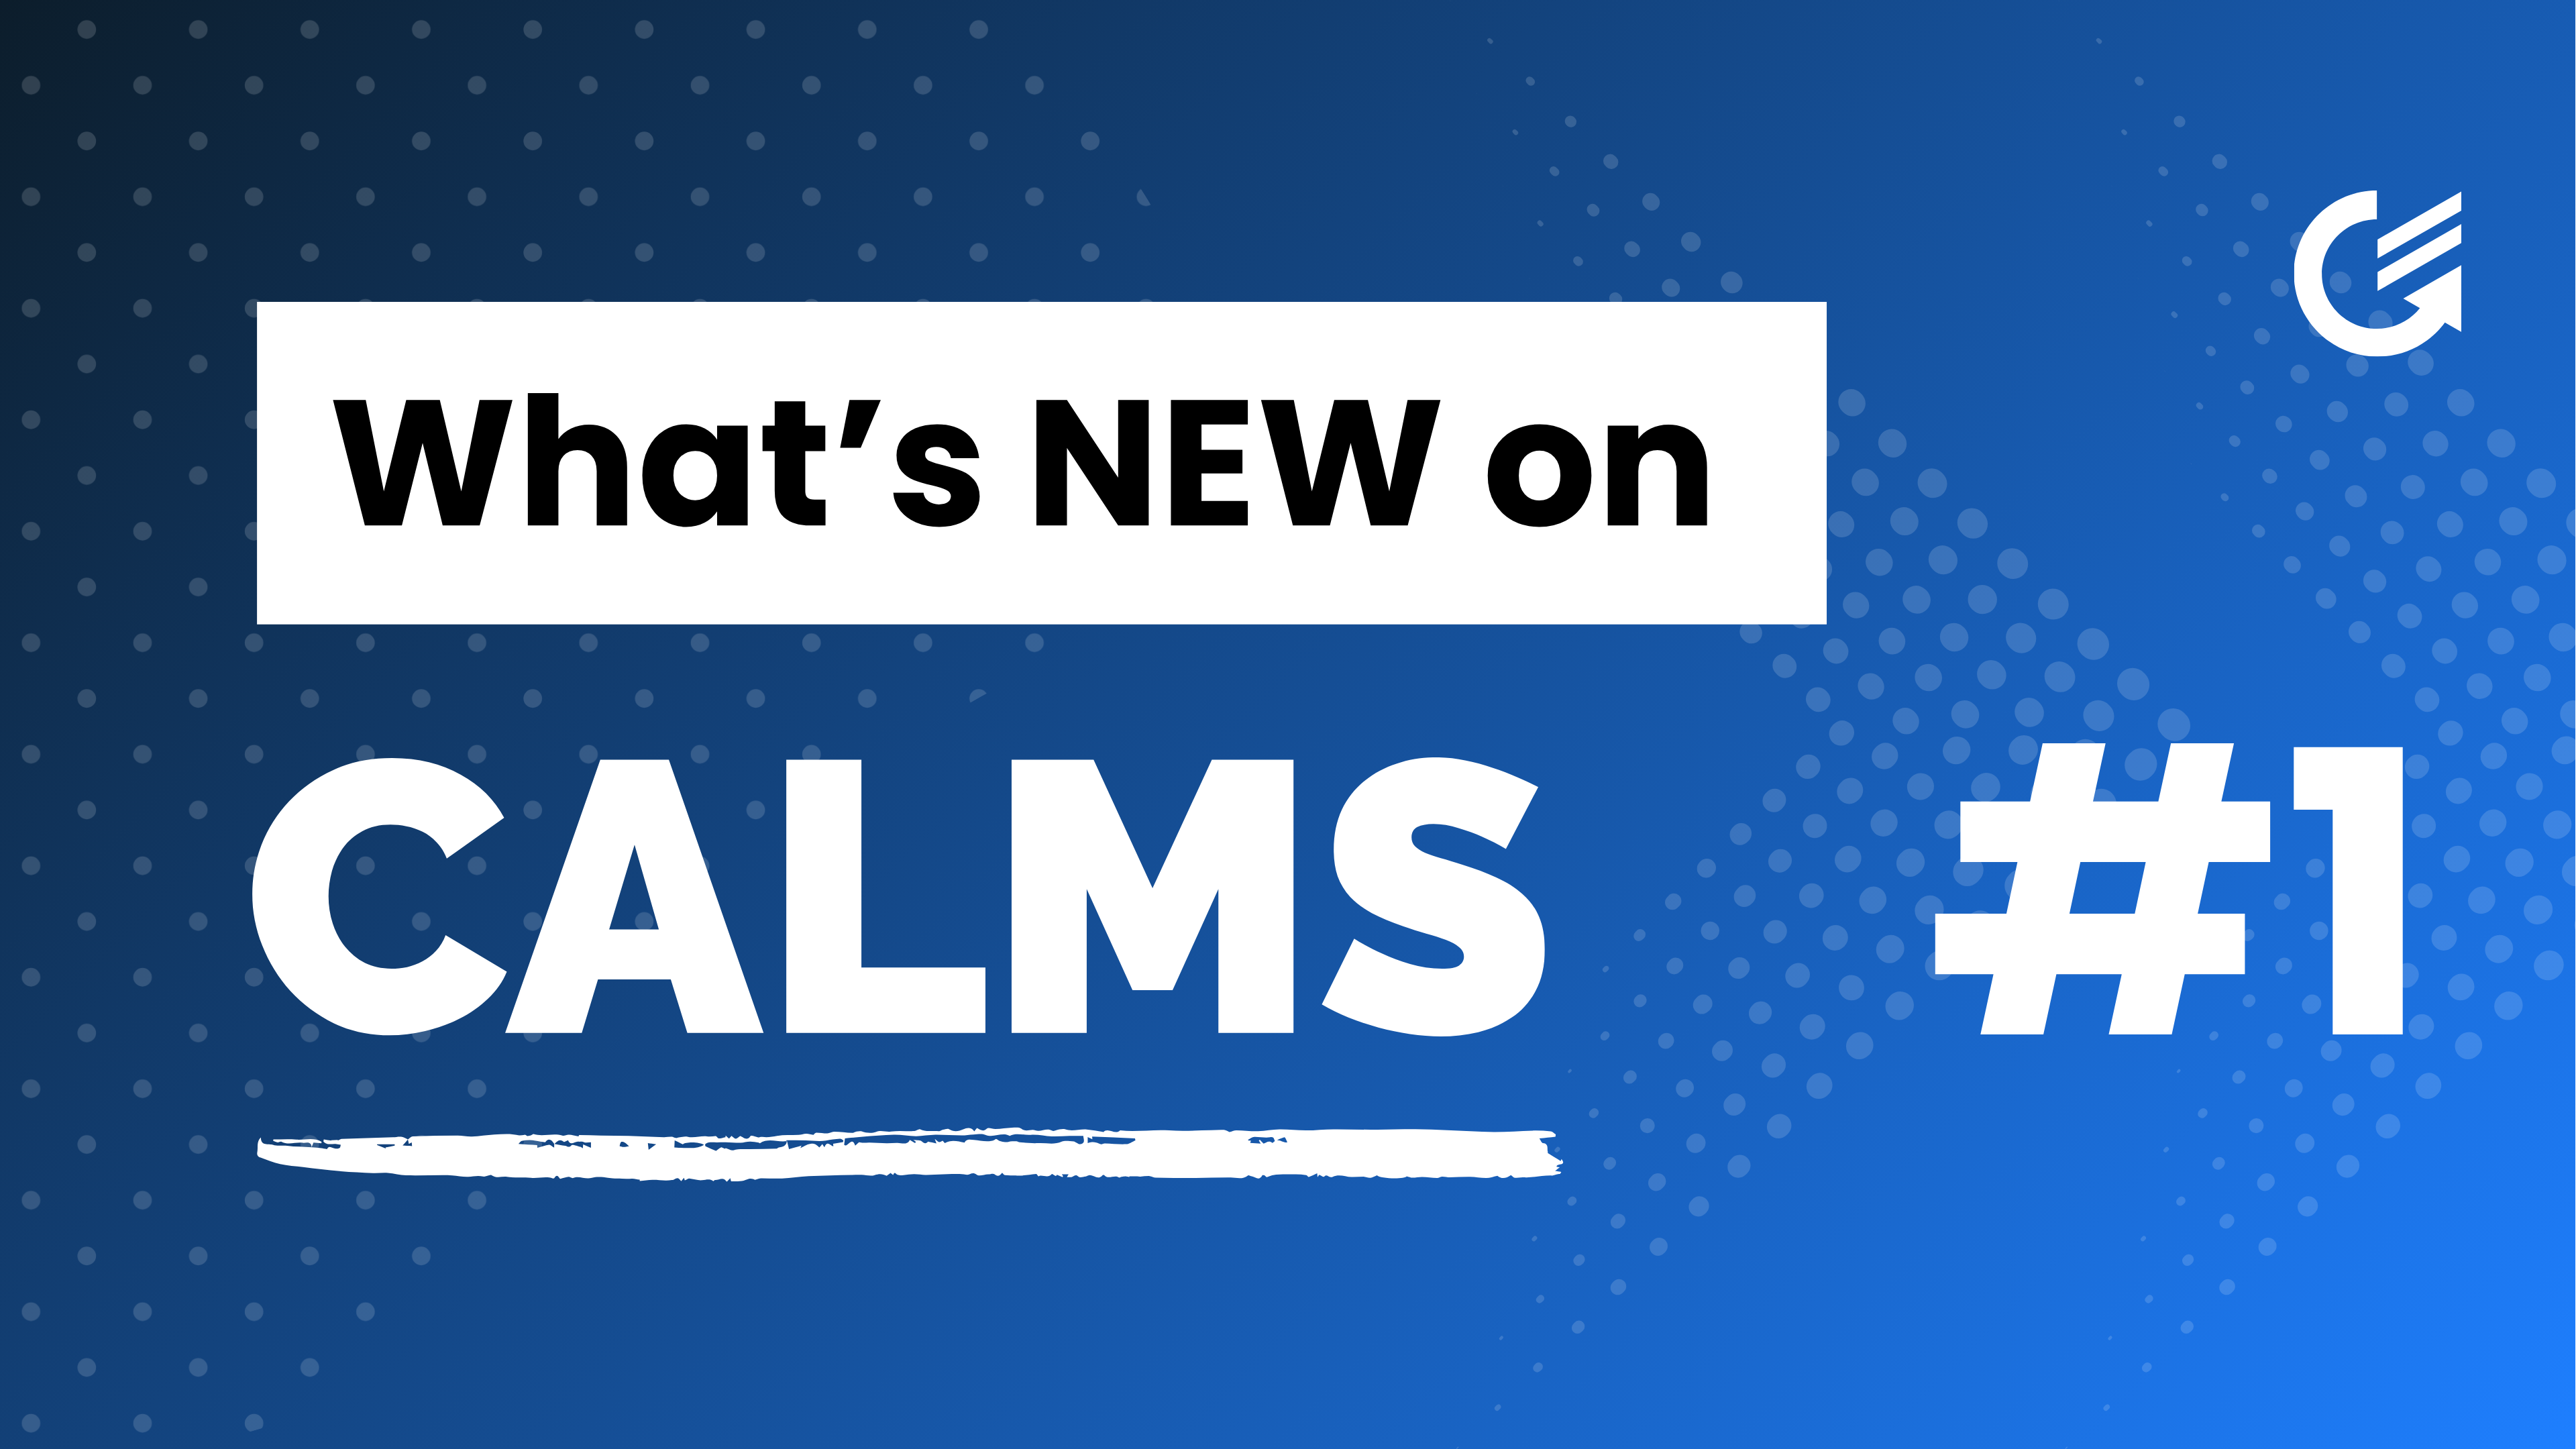 CALMS Application - New Features #1 